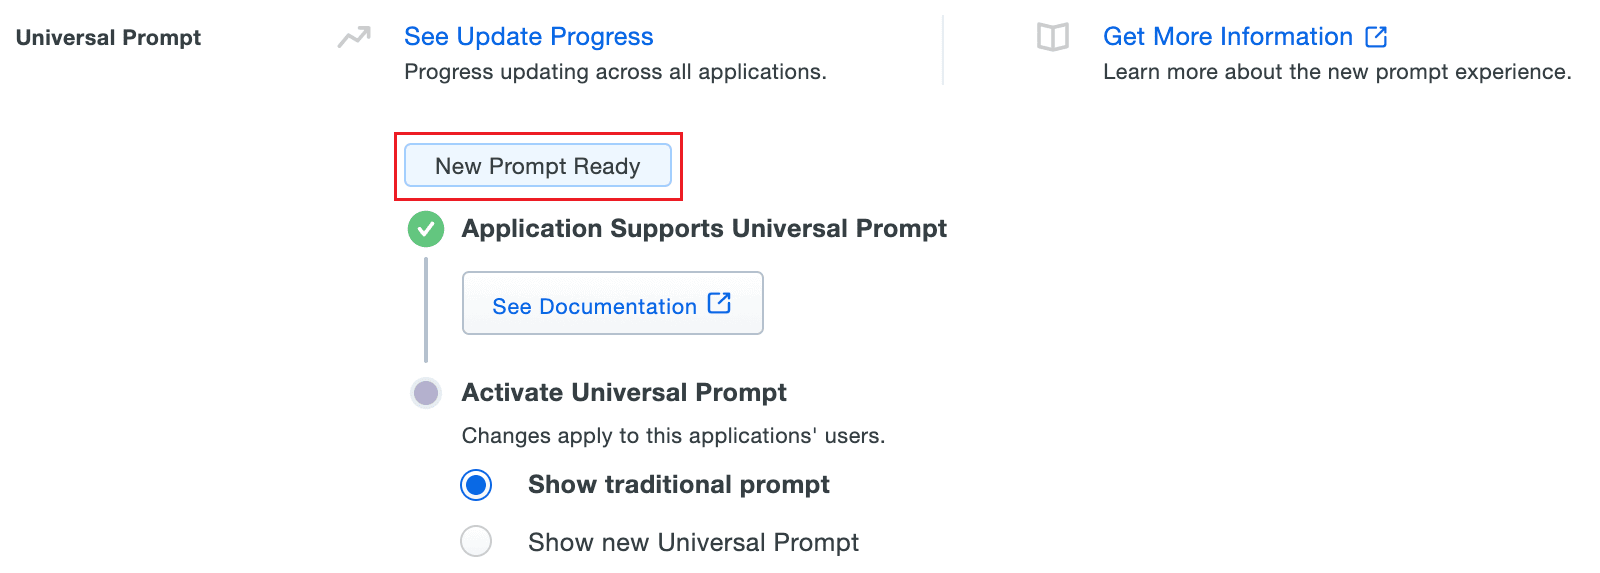 Steps to migrate to the new Universal Prompt